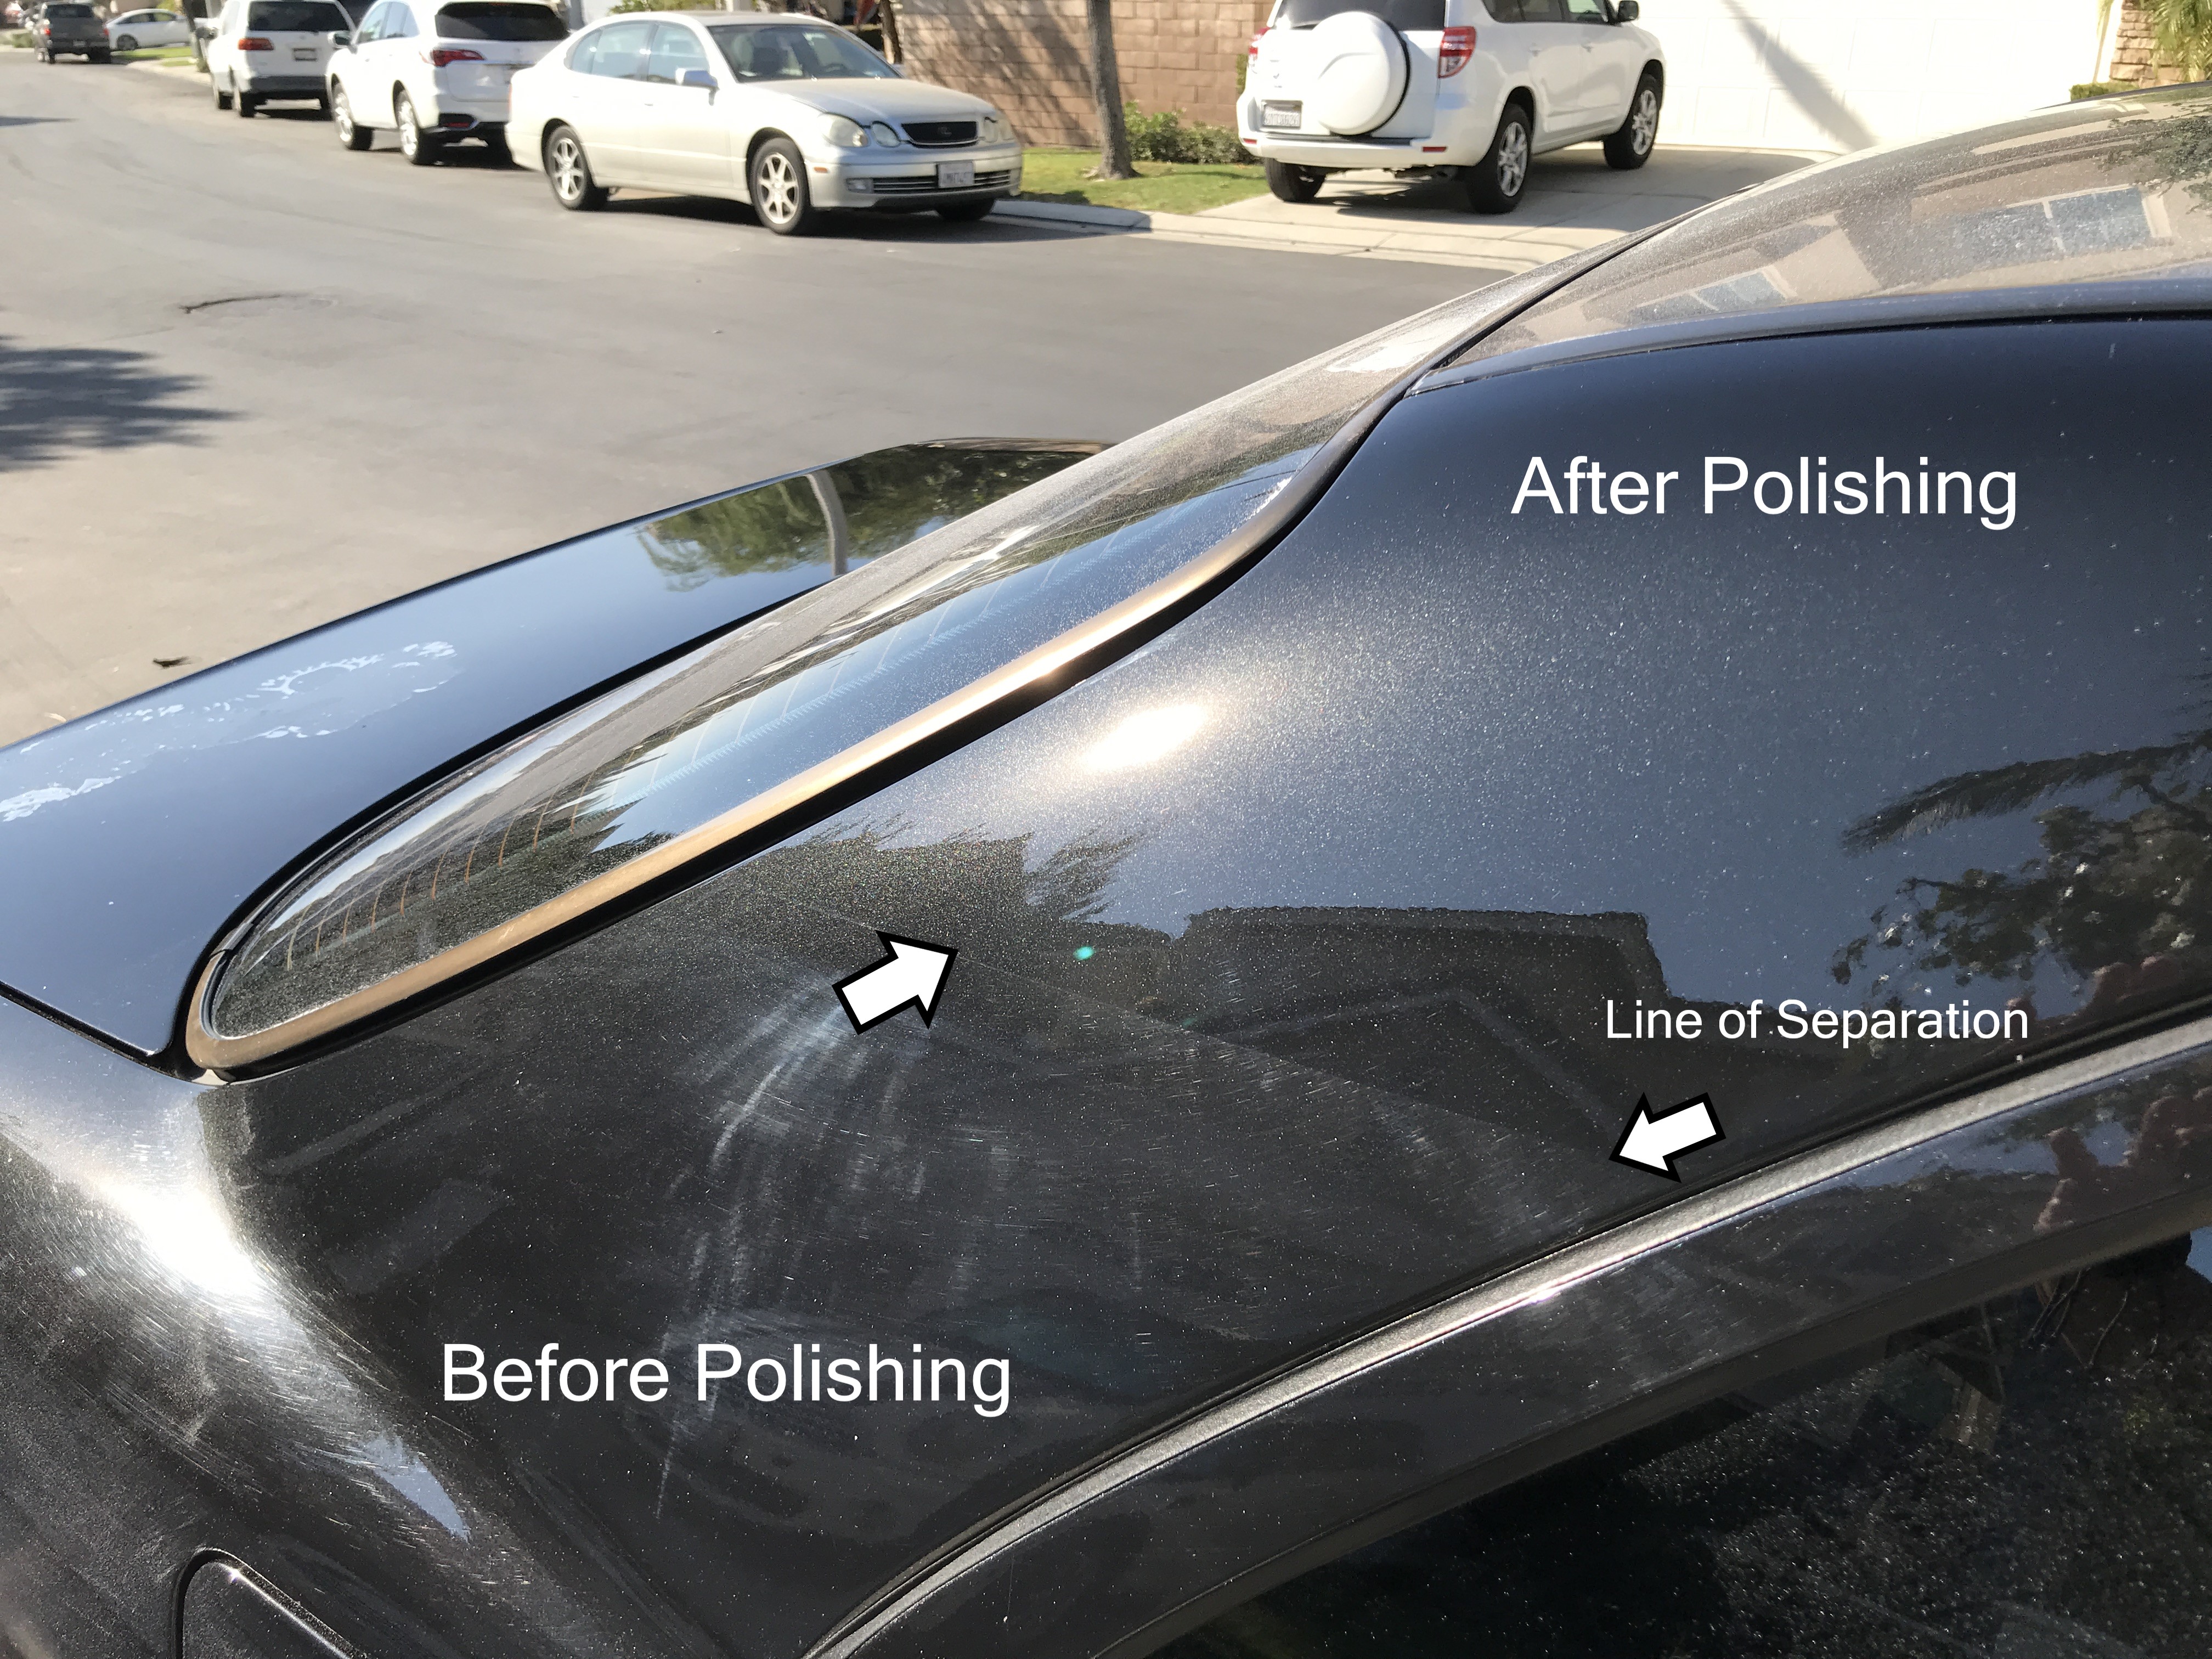 How Often Should You Polish Your Car?